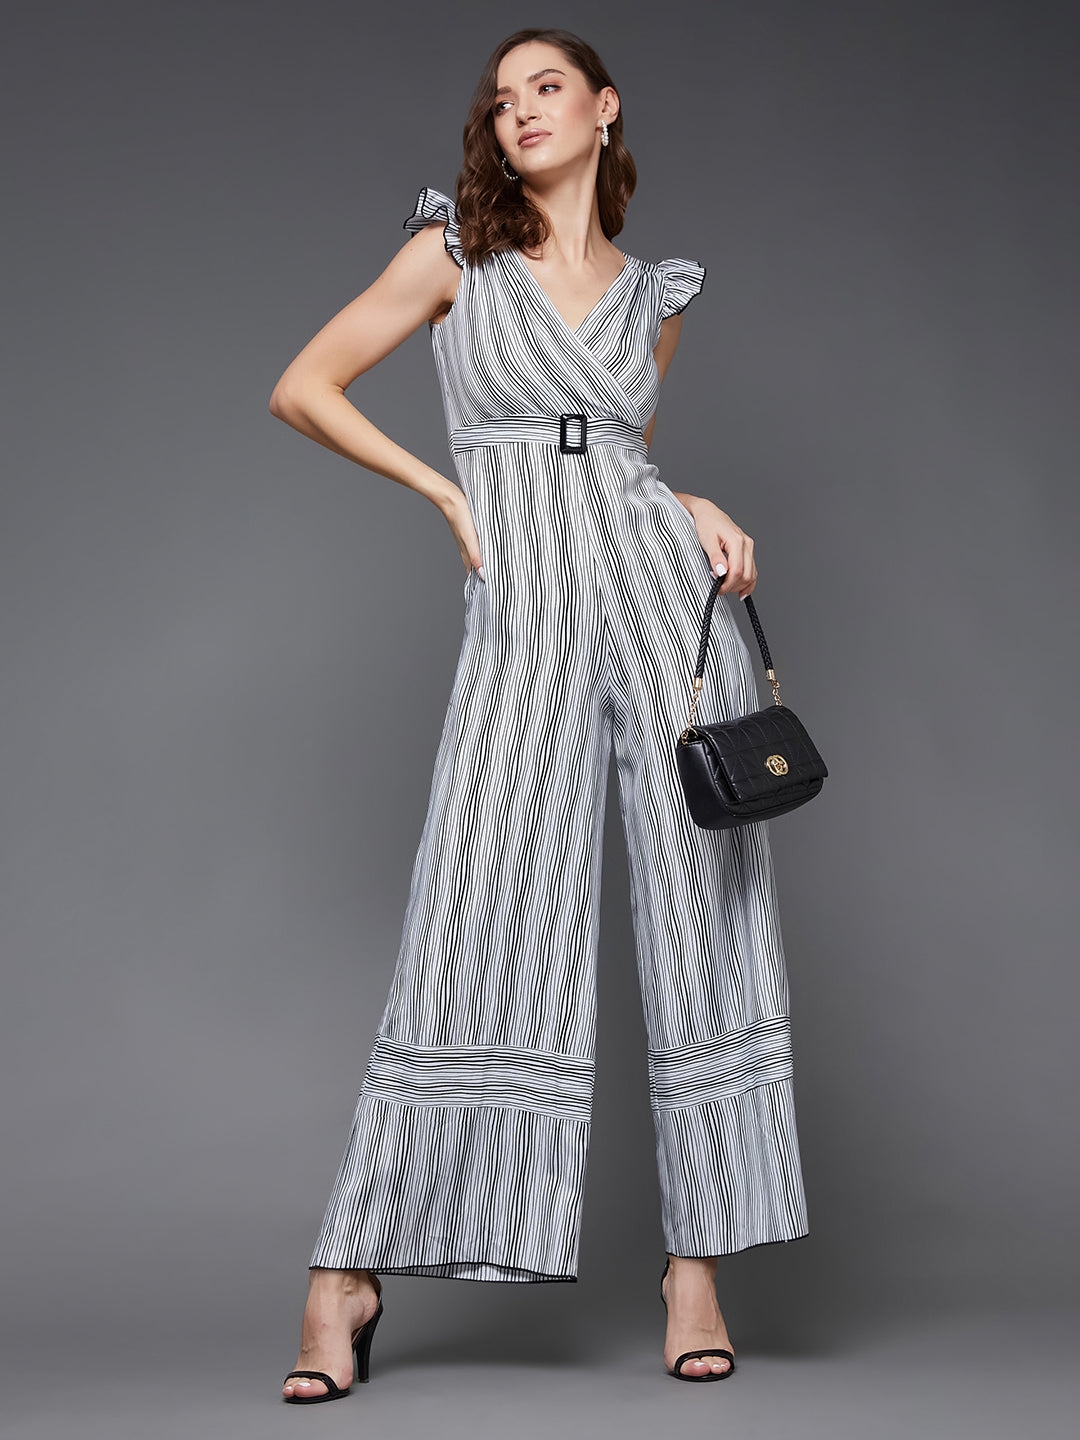 Black and White Striped V-Neck Frill Viscose Rayon Wrap Relaxed Fit Regular Jumpsuit